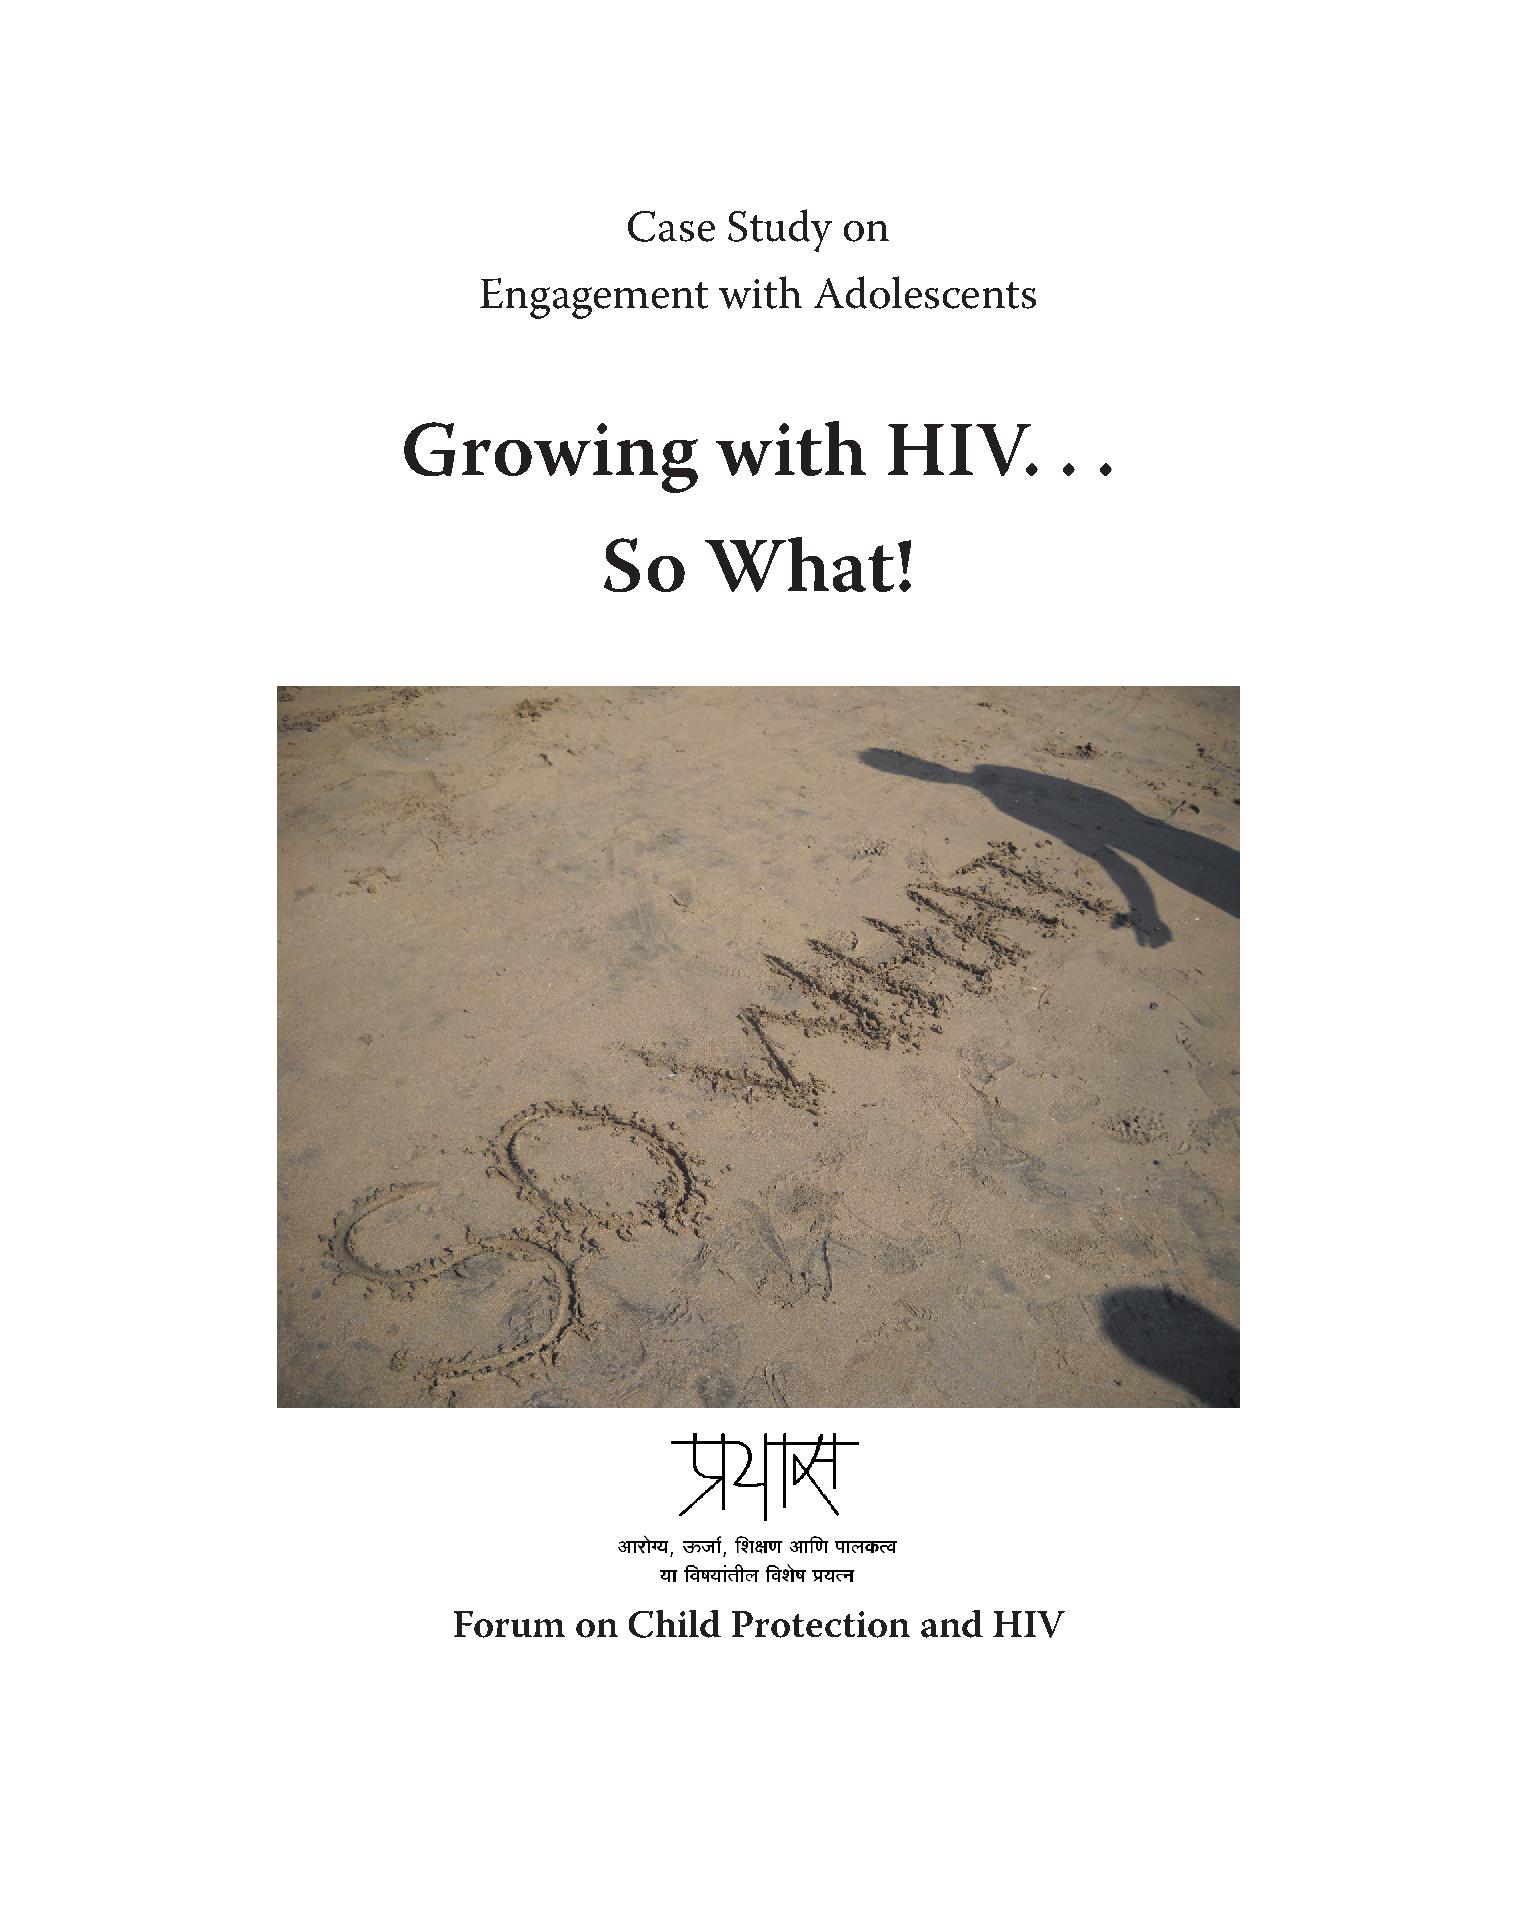 Growing with HIV So What!  A case study on engagement with adolescents